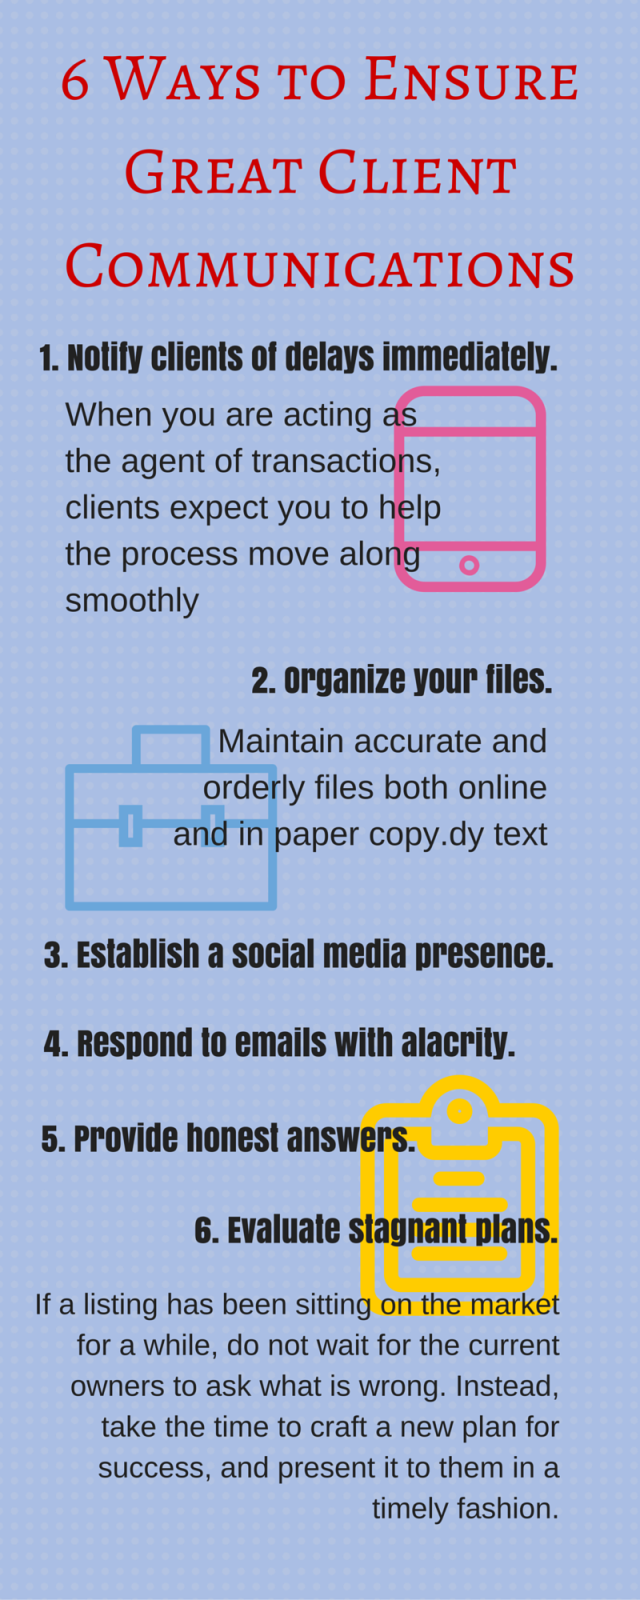 6 Ways to Ensure Great Client Communications Infographic by Roman Temkin